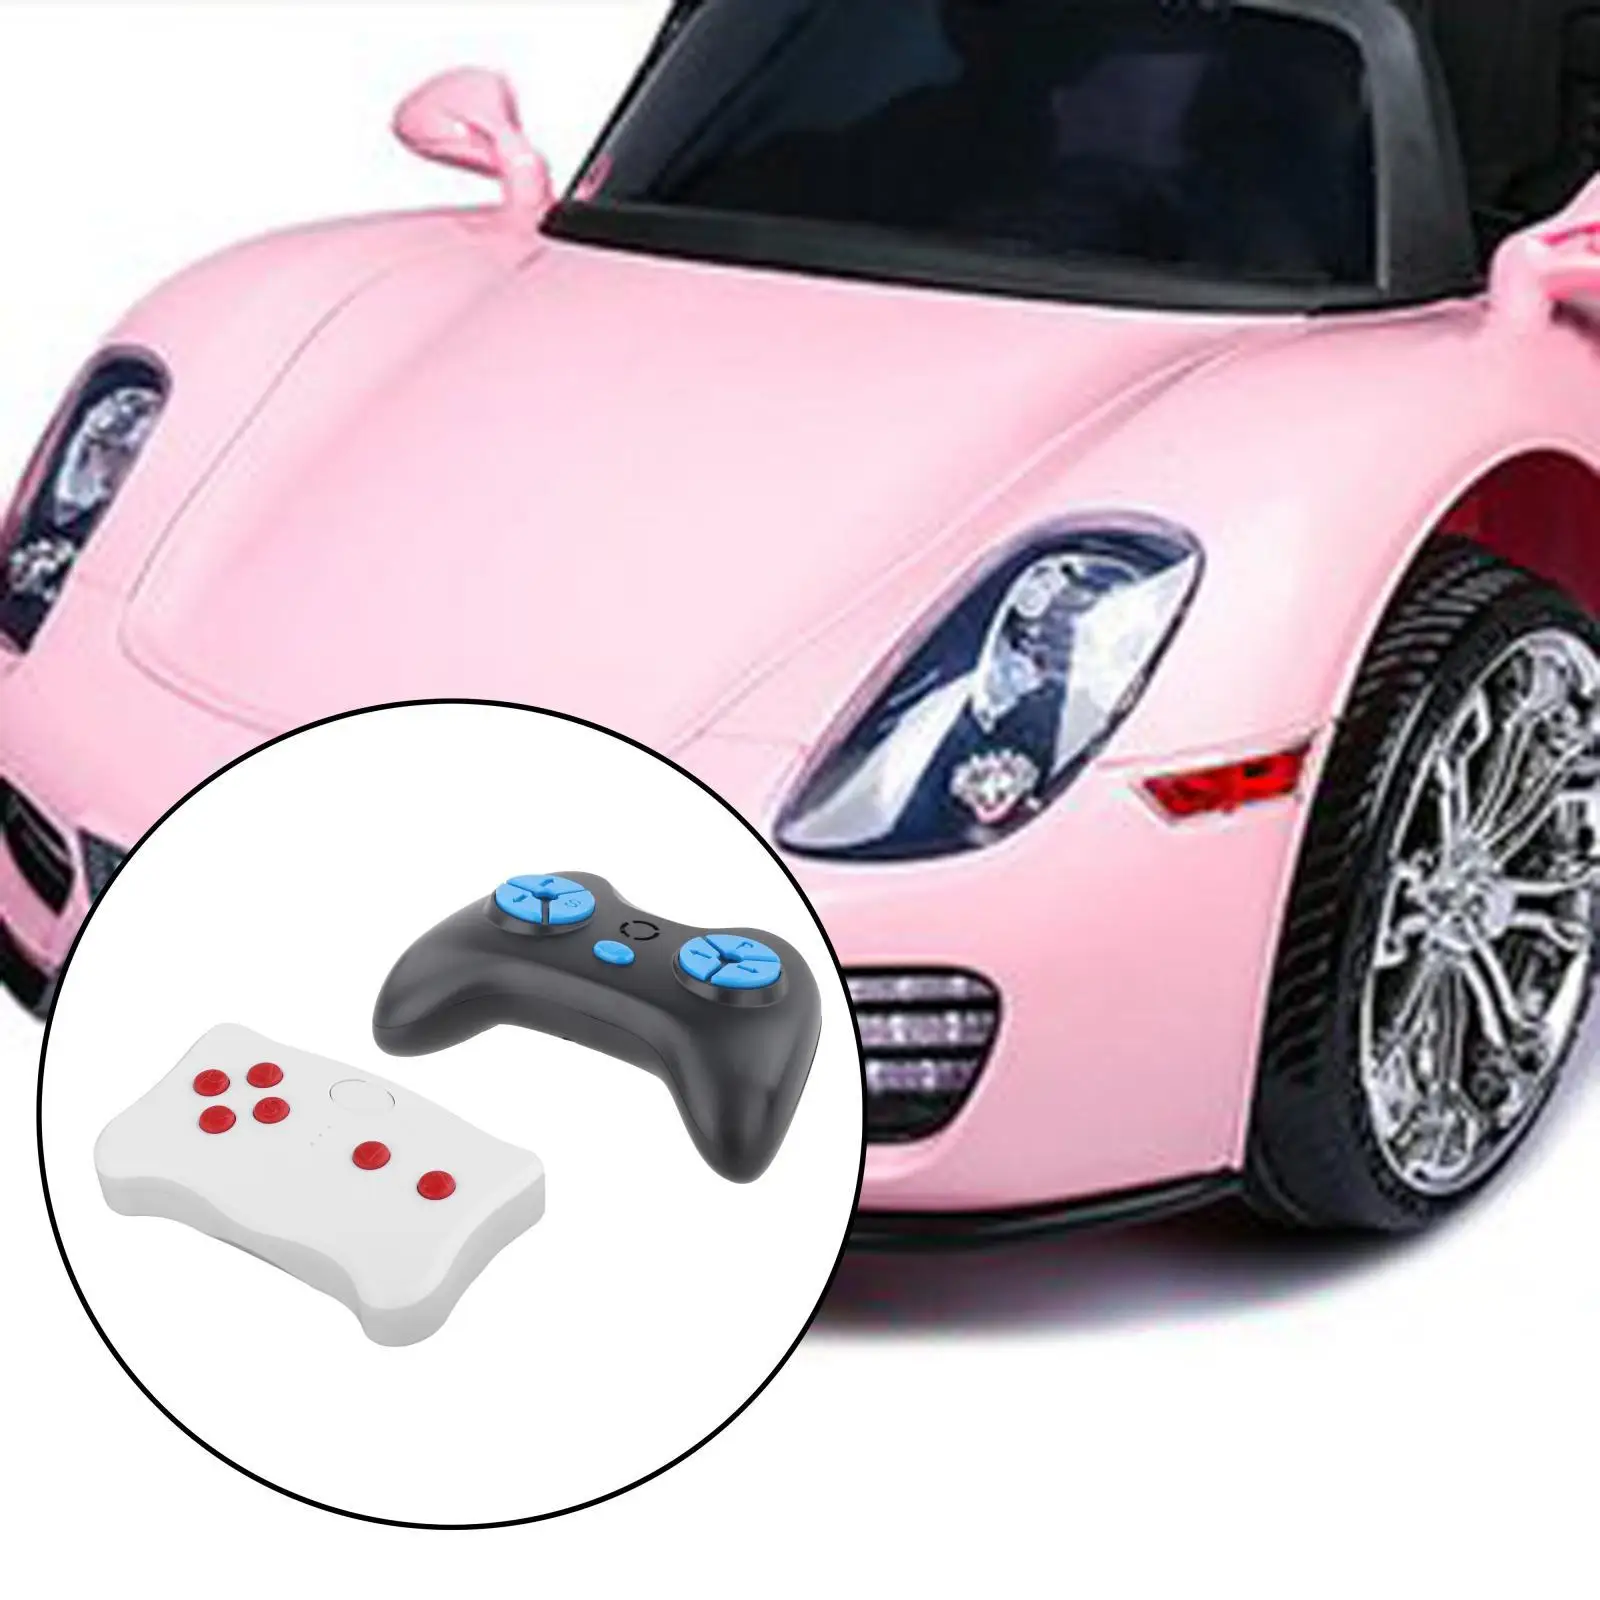  Remote Controller Accessories  Cars Upgrade Parts for Kids Children